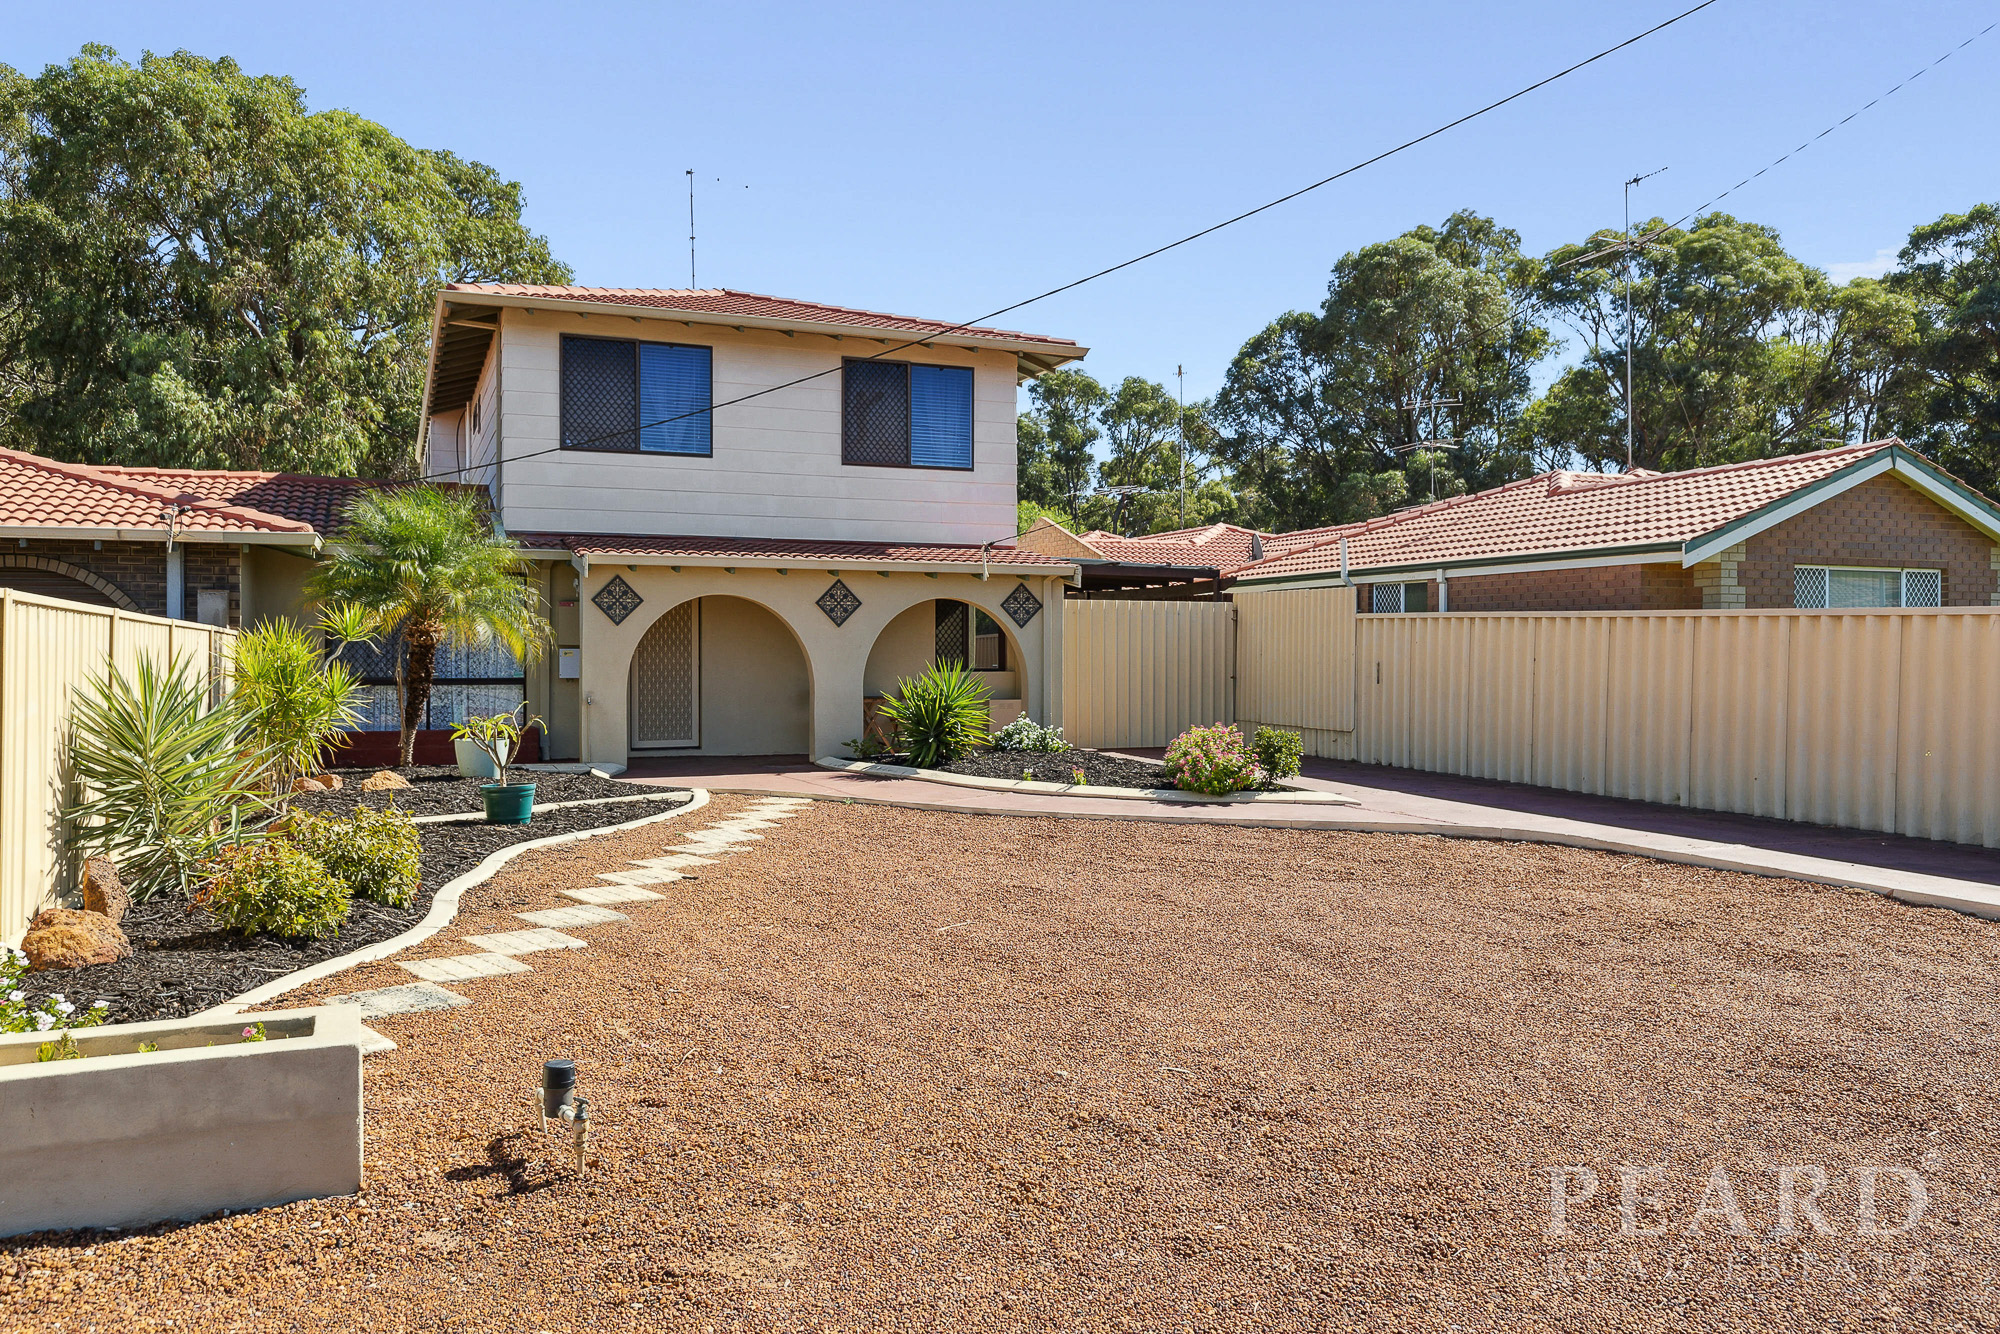 Excellent 4/5 bed Home in the Heart of Mandurah